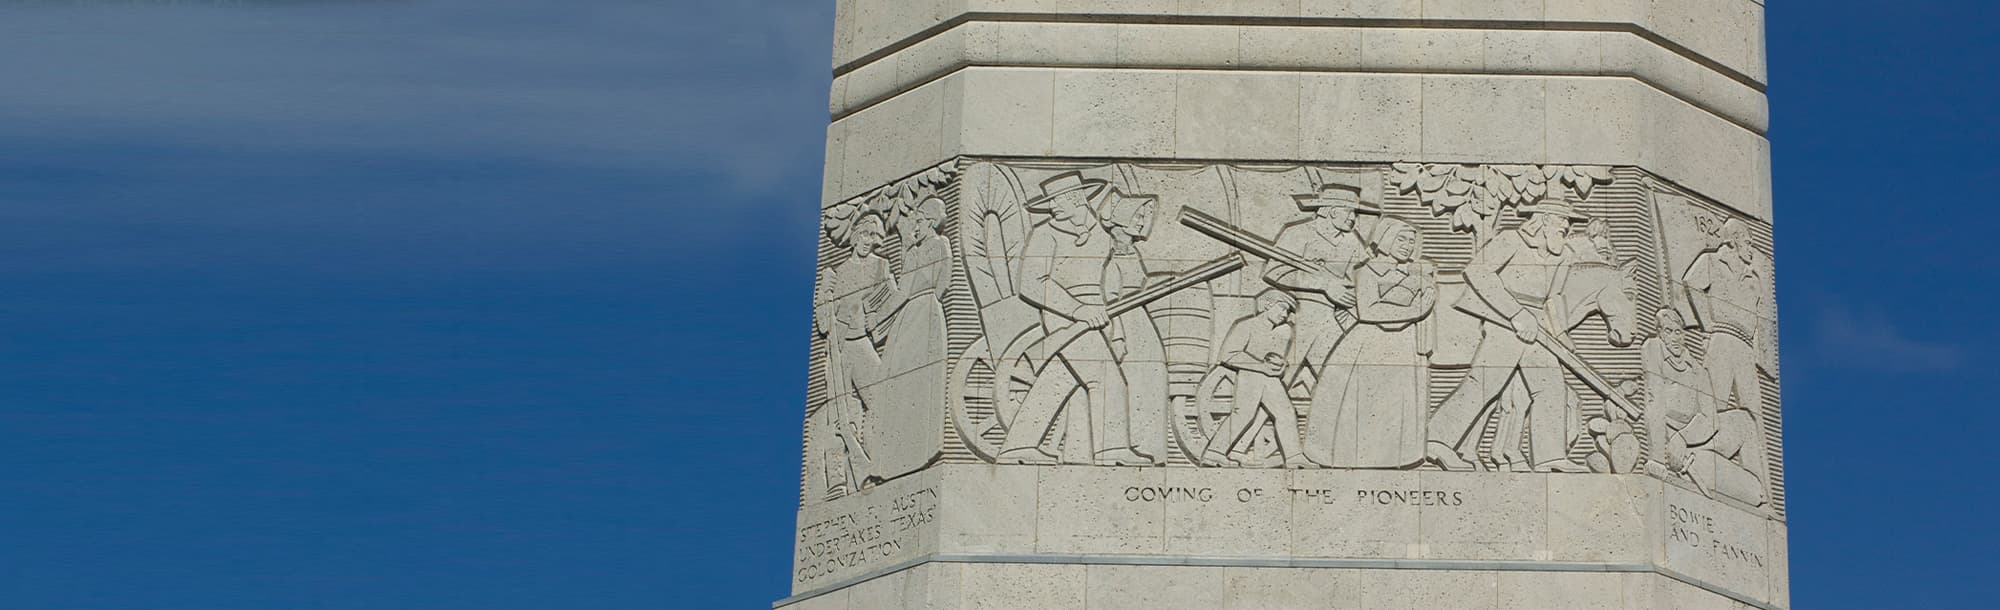 The side of the San Jacinto Monument depicting the arrival of the pioneers to Texas